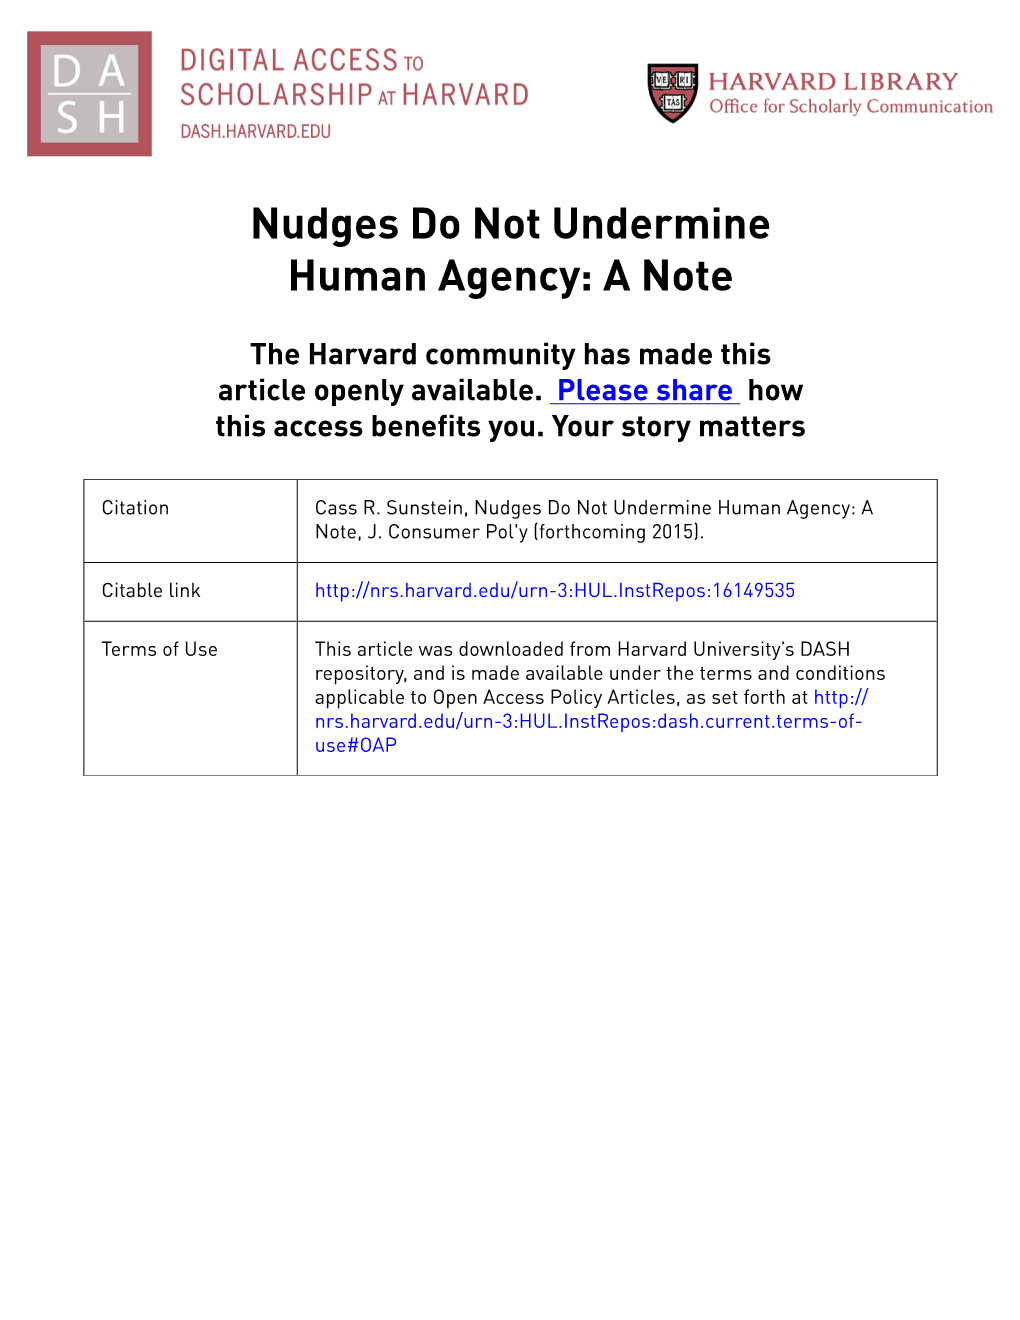 Nudges Do Not Undermine Human Agency: a Note